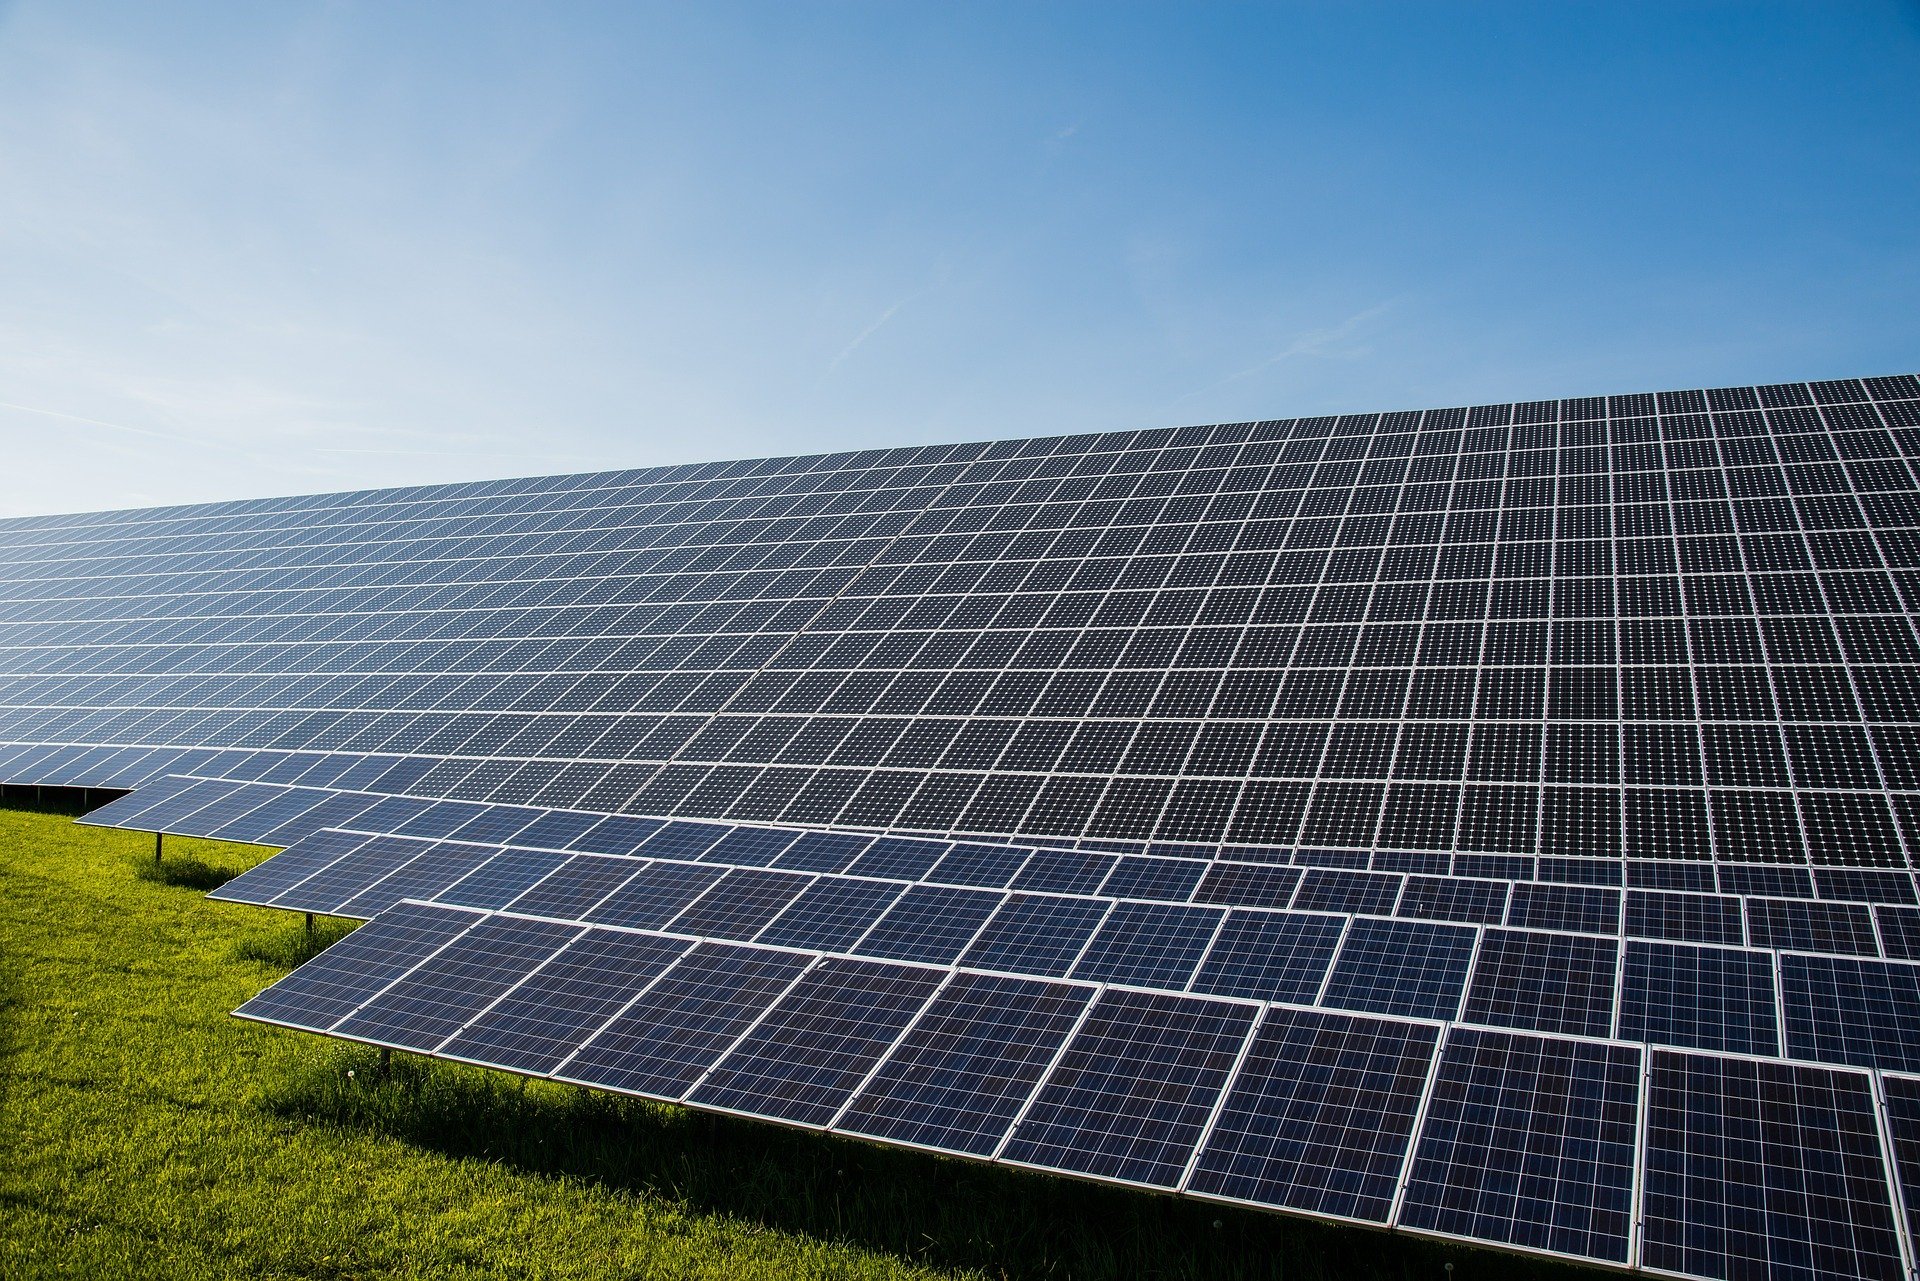 Photovoltaic modules: new frontiers of power coming soon